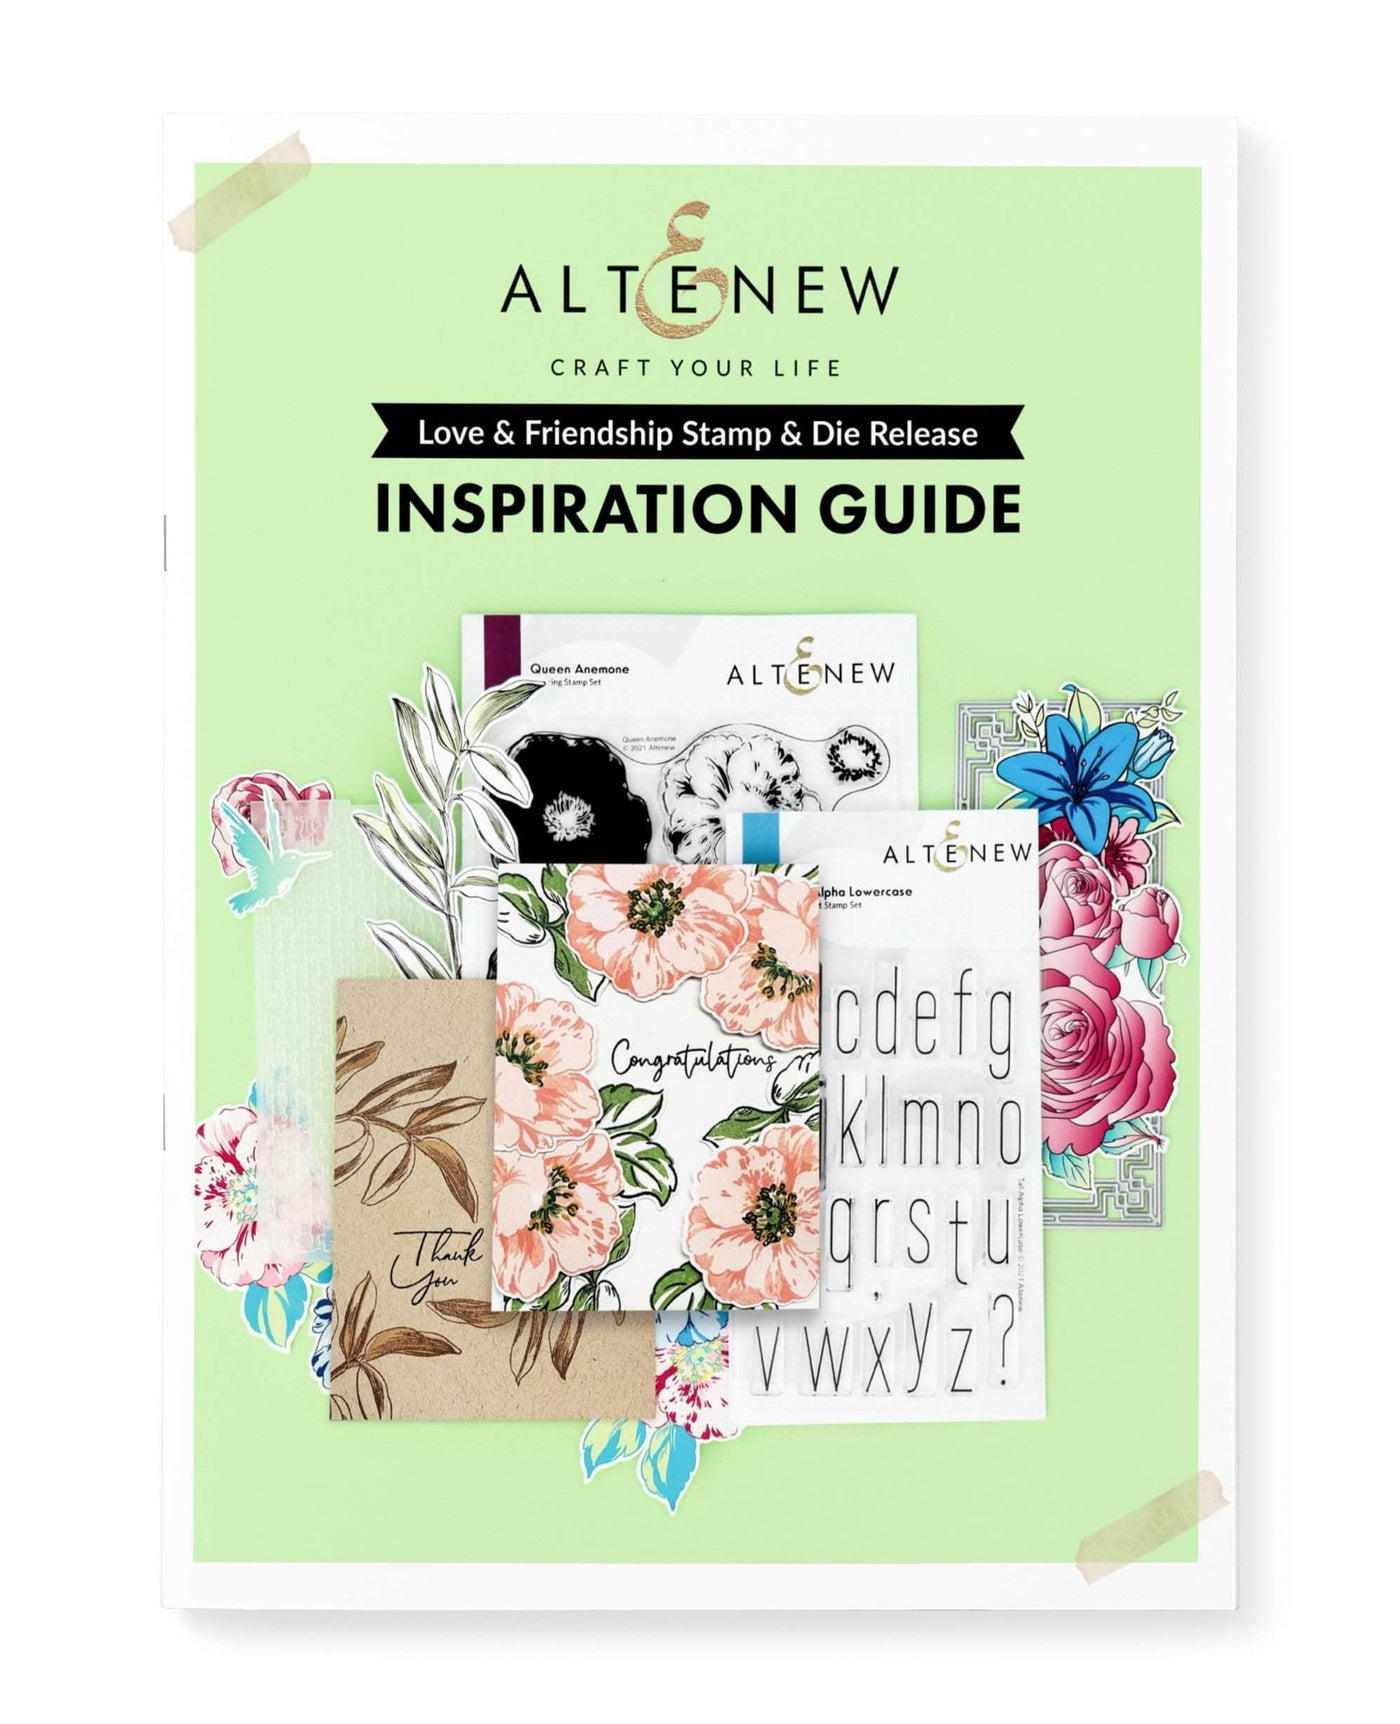 Printed Media Love & Friendship Stamp & Die Release Inspiration Guide